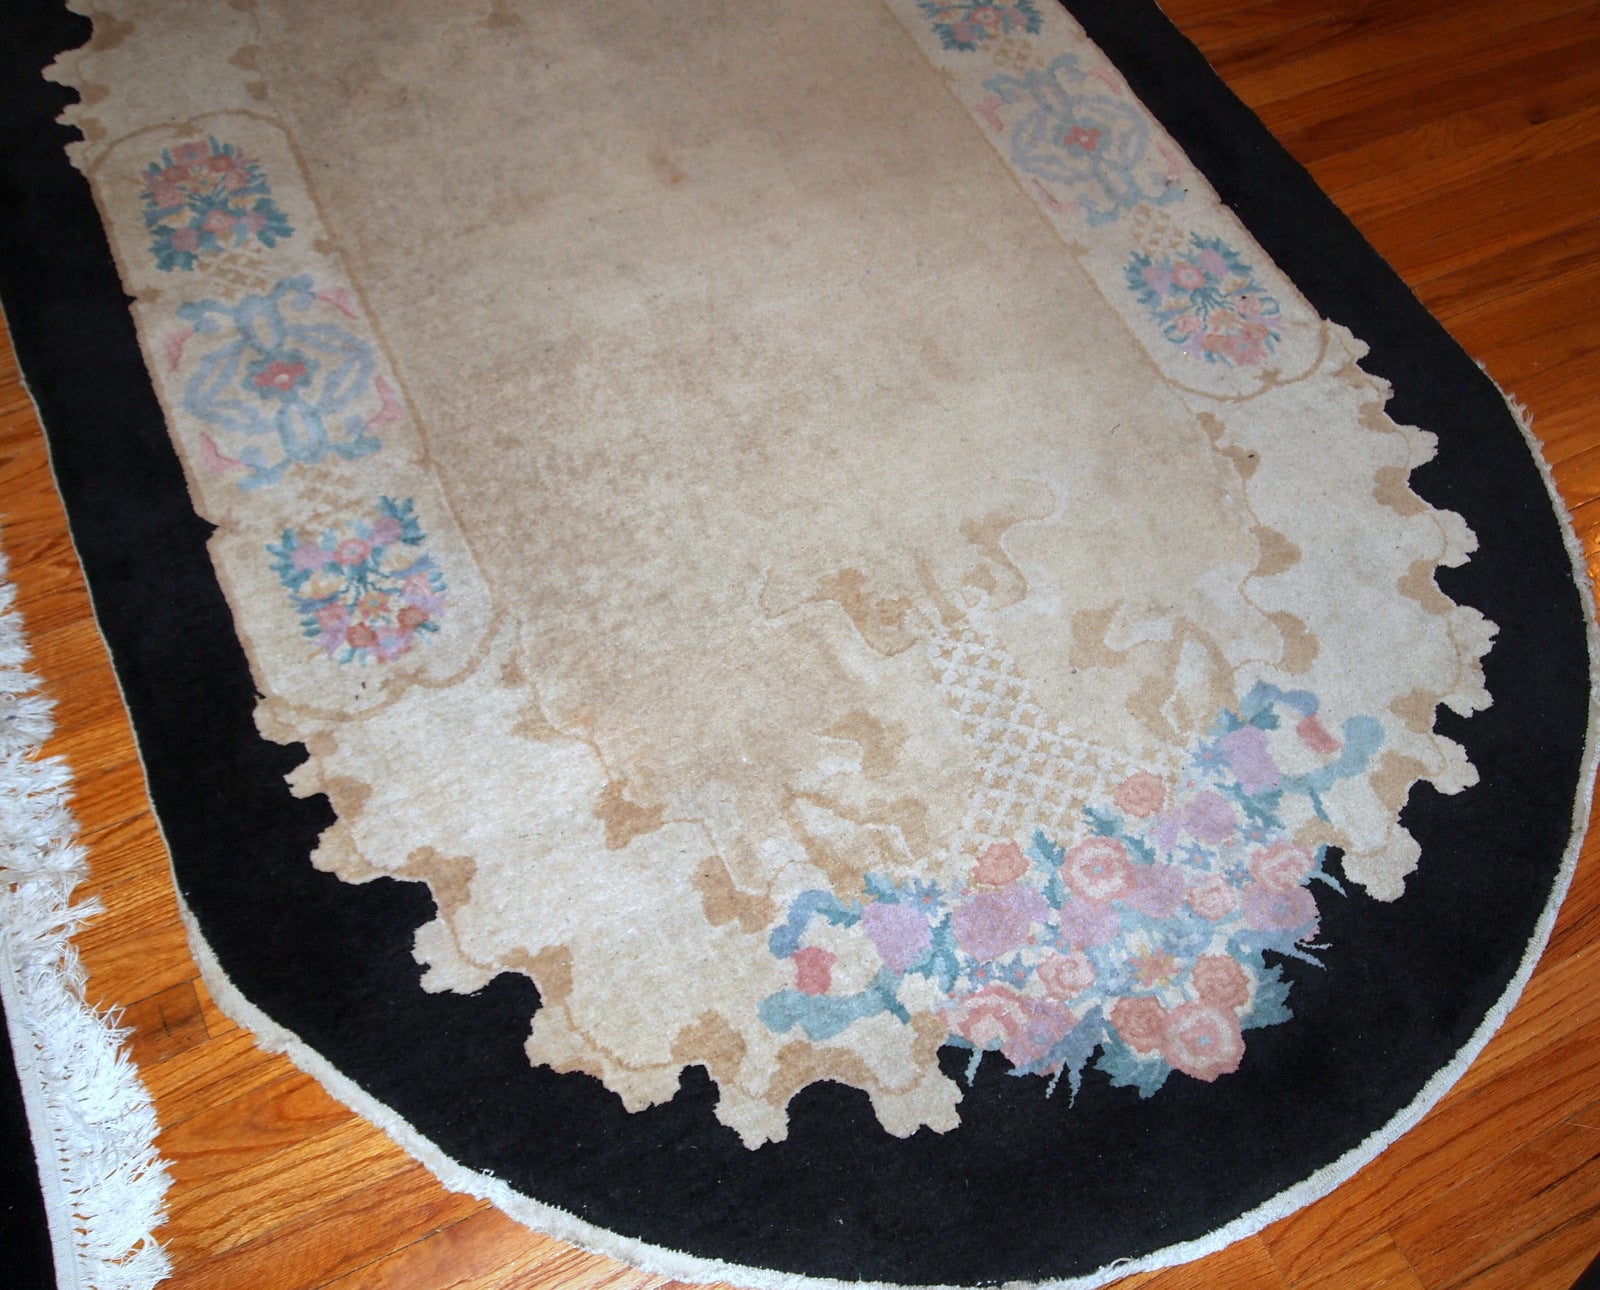 Handmade antique oval Art Deco Chinese rug in light brown shade with black border. The rug is in original good condition.